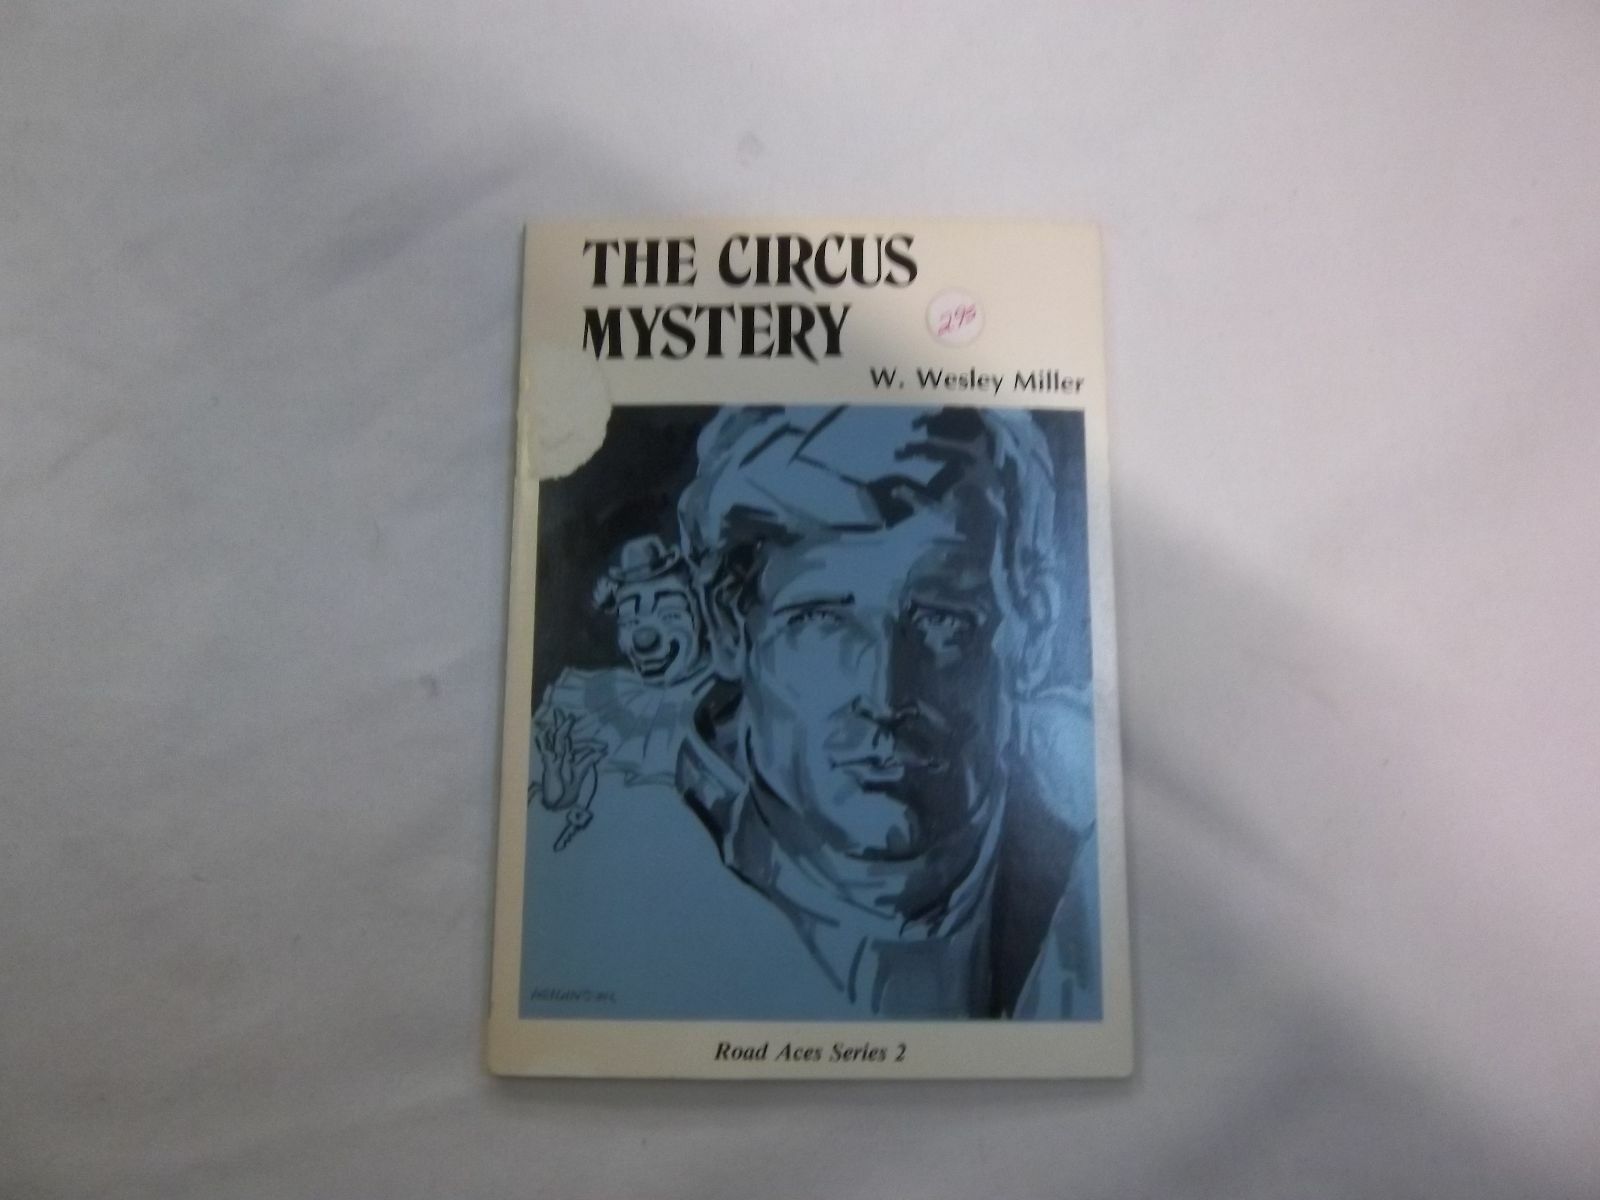 THE CIRCUS MYSTERY BY WESLEY MILLER PAPERBACK